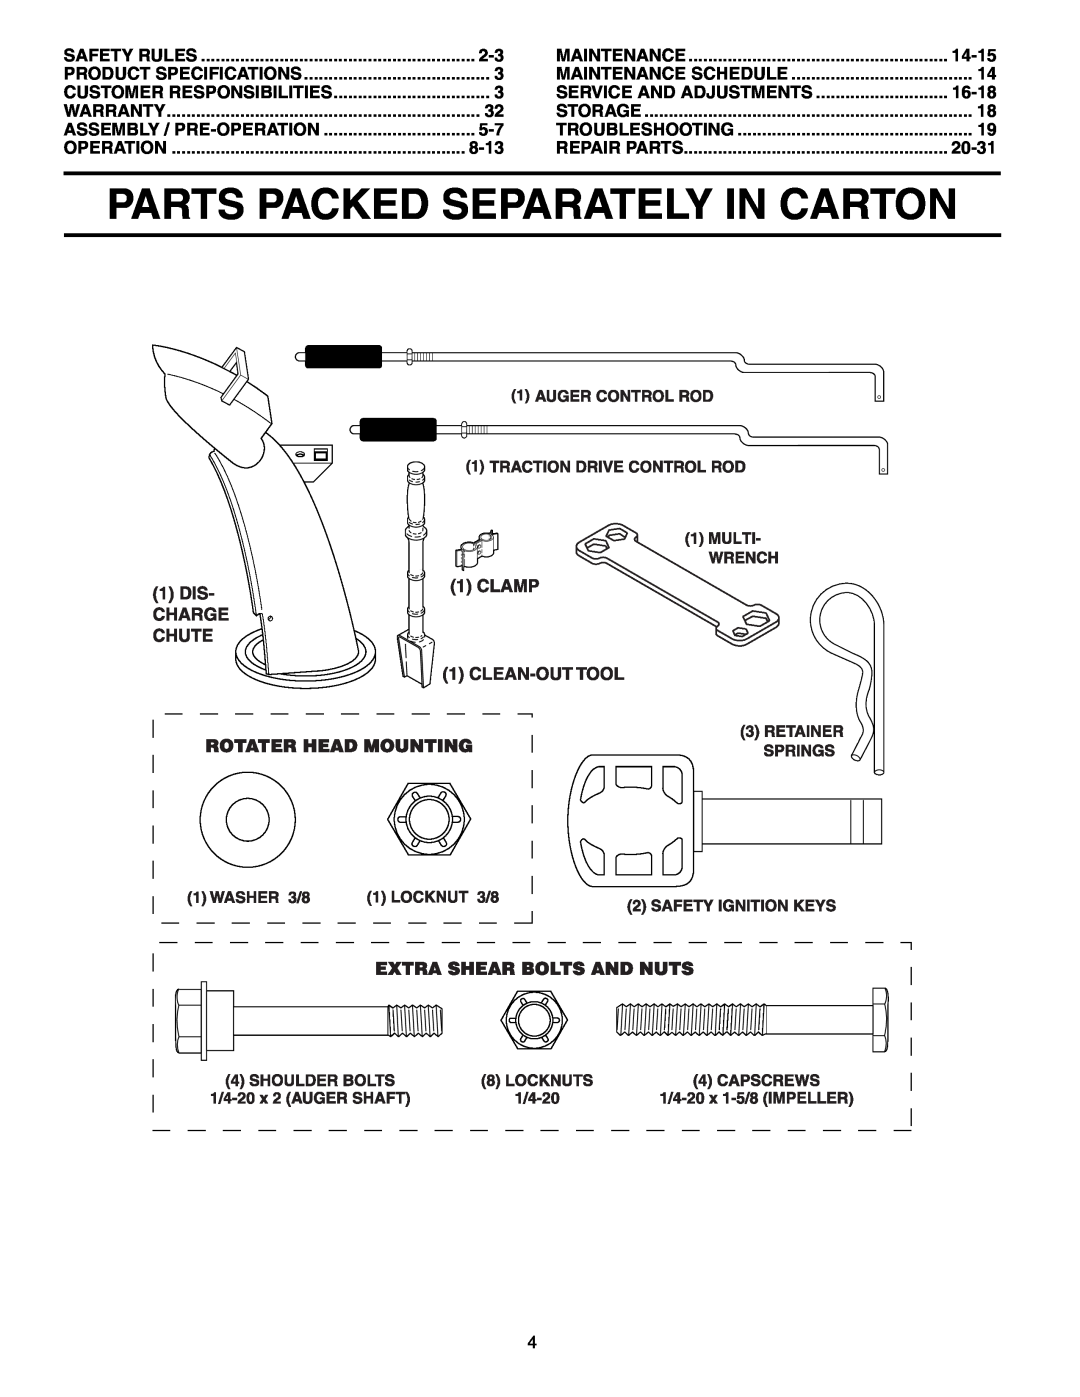 Poulan PR524ESA owner manual Parts Packed Separately In Carton, 8-13, 14-15, Service And Adjustments, 16-18, 20-31 